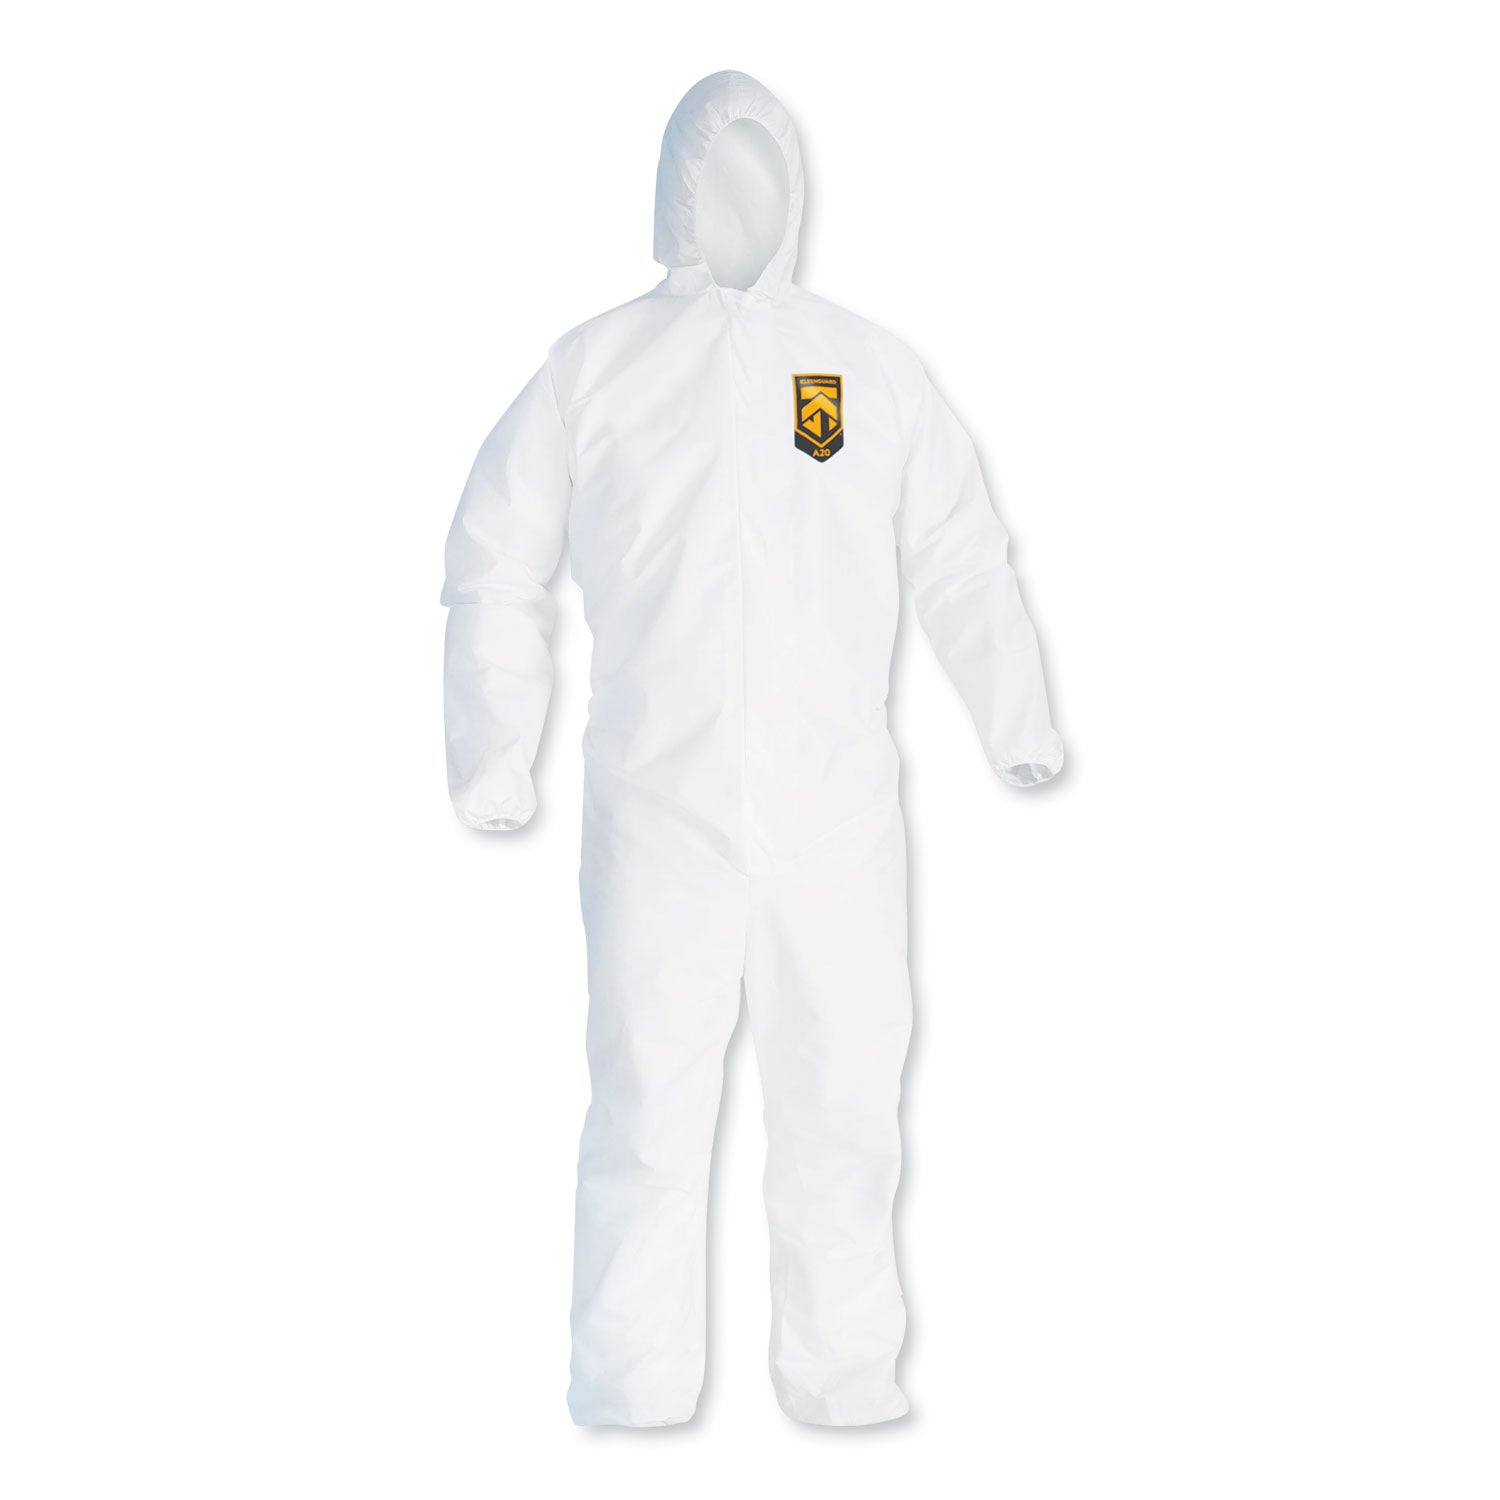 a20-breathable-particle-protection-coveralls-zipper-front-large-white_kcc49113 - 1